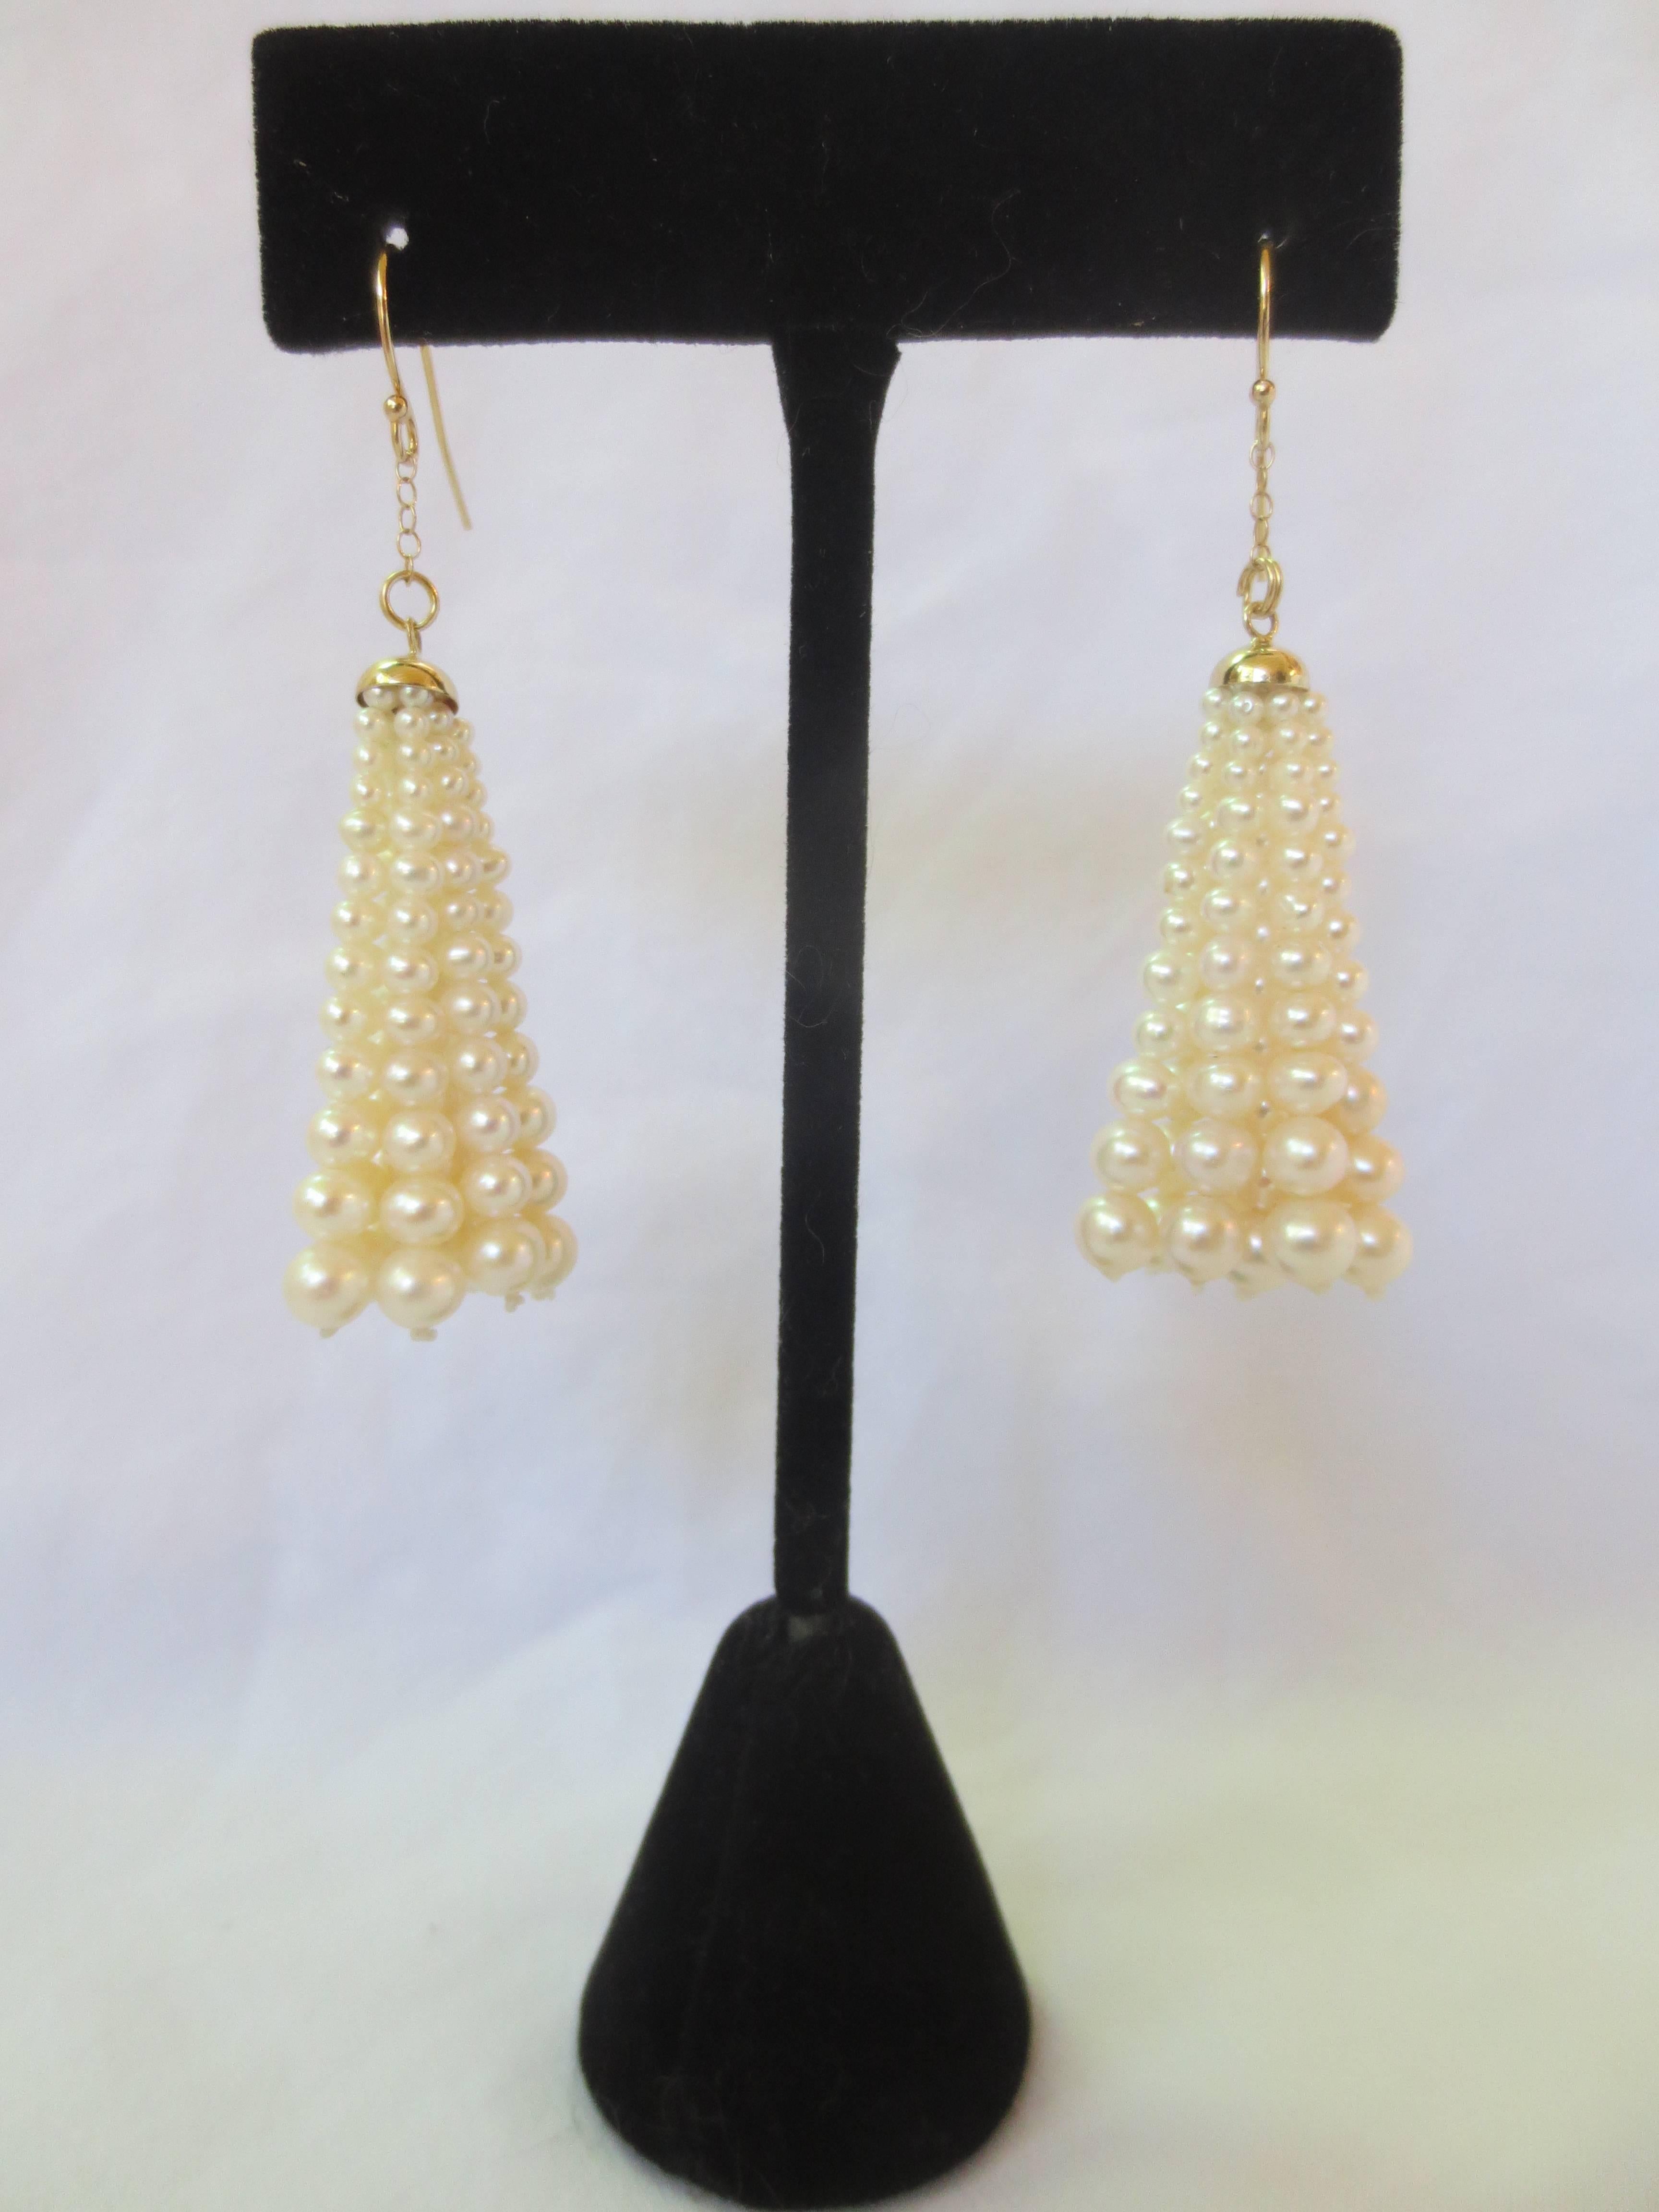 Strands of pearls, (eight strands each) graduated in size from 1 mm to 4 mm emanate from a 14 k yellow gold cup. The pearls and cup dangle from a gold wire, and dance with every step. The earrings with wires measure 2.5 inches, and tassels alone are